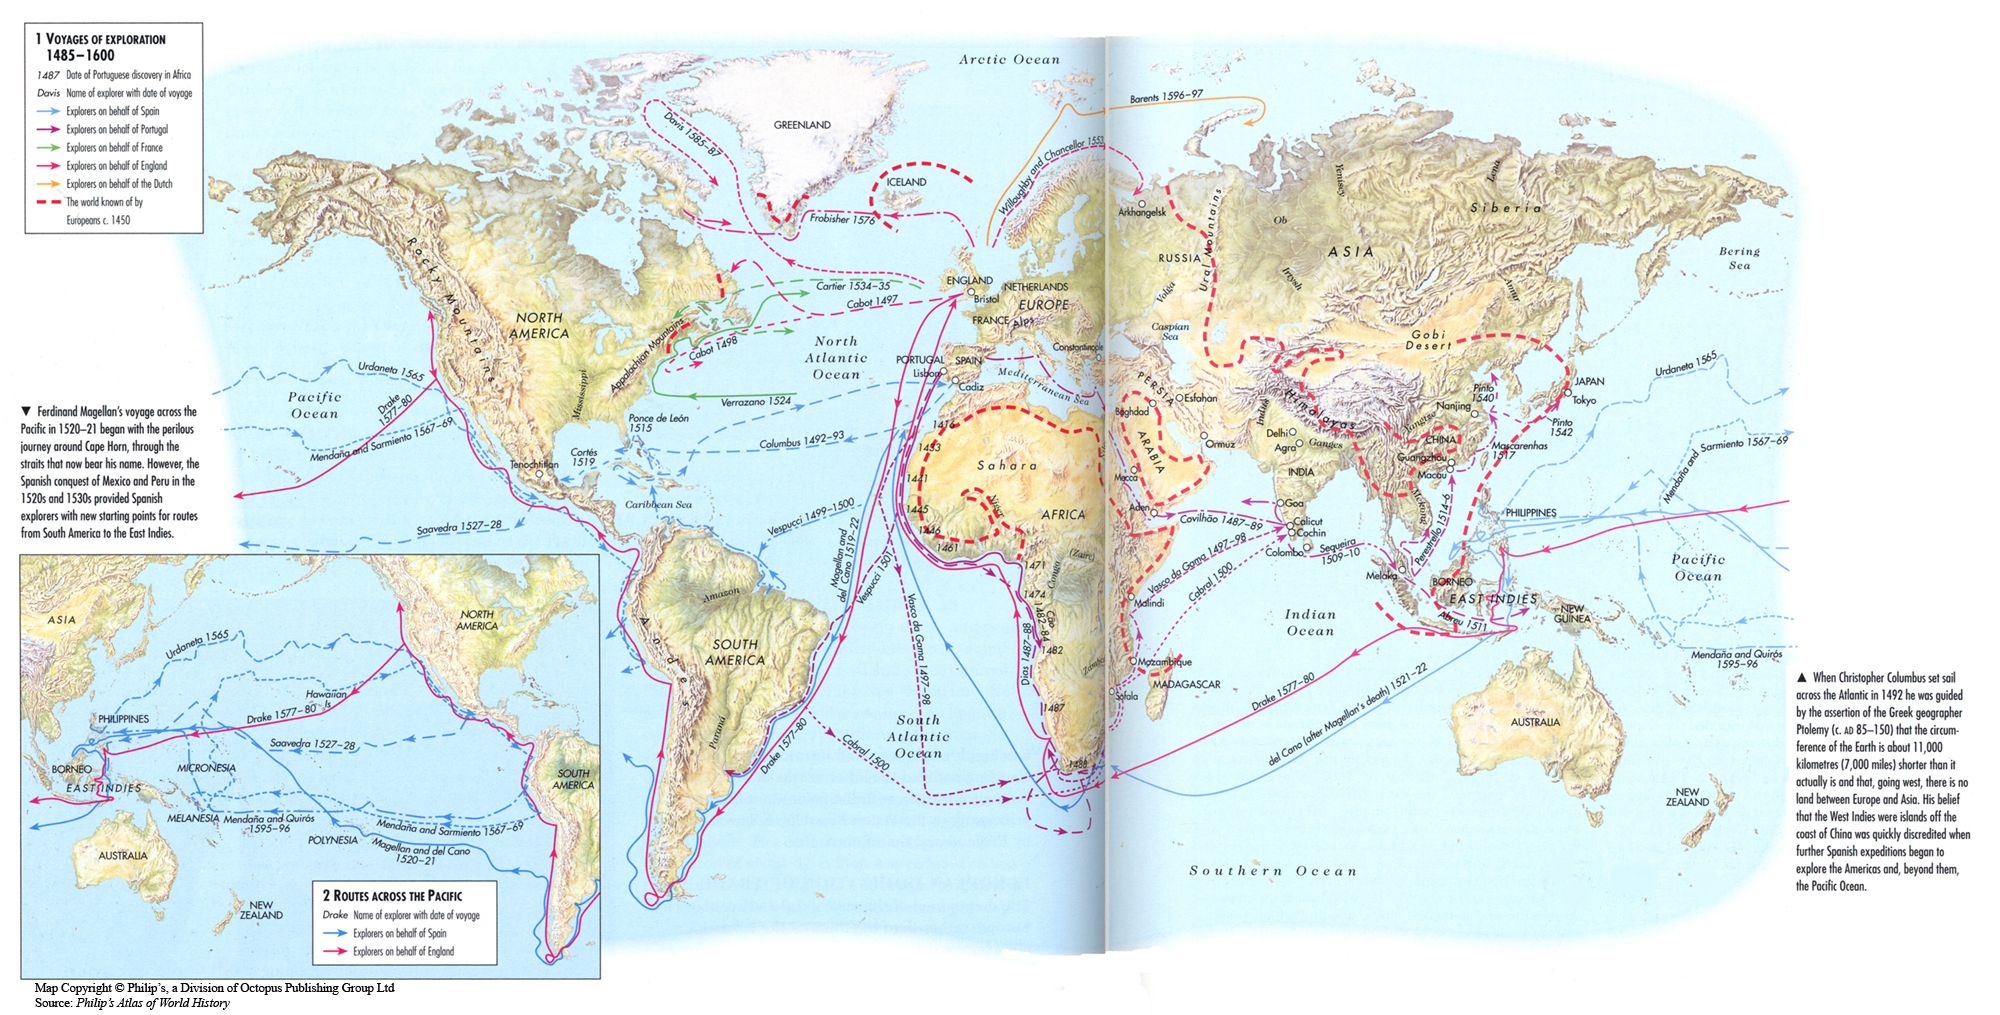 exploration voyages of discovery history